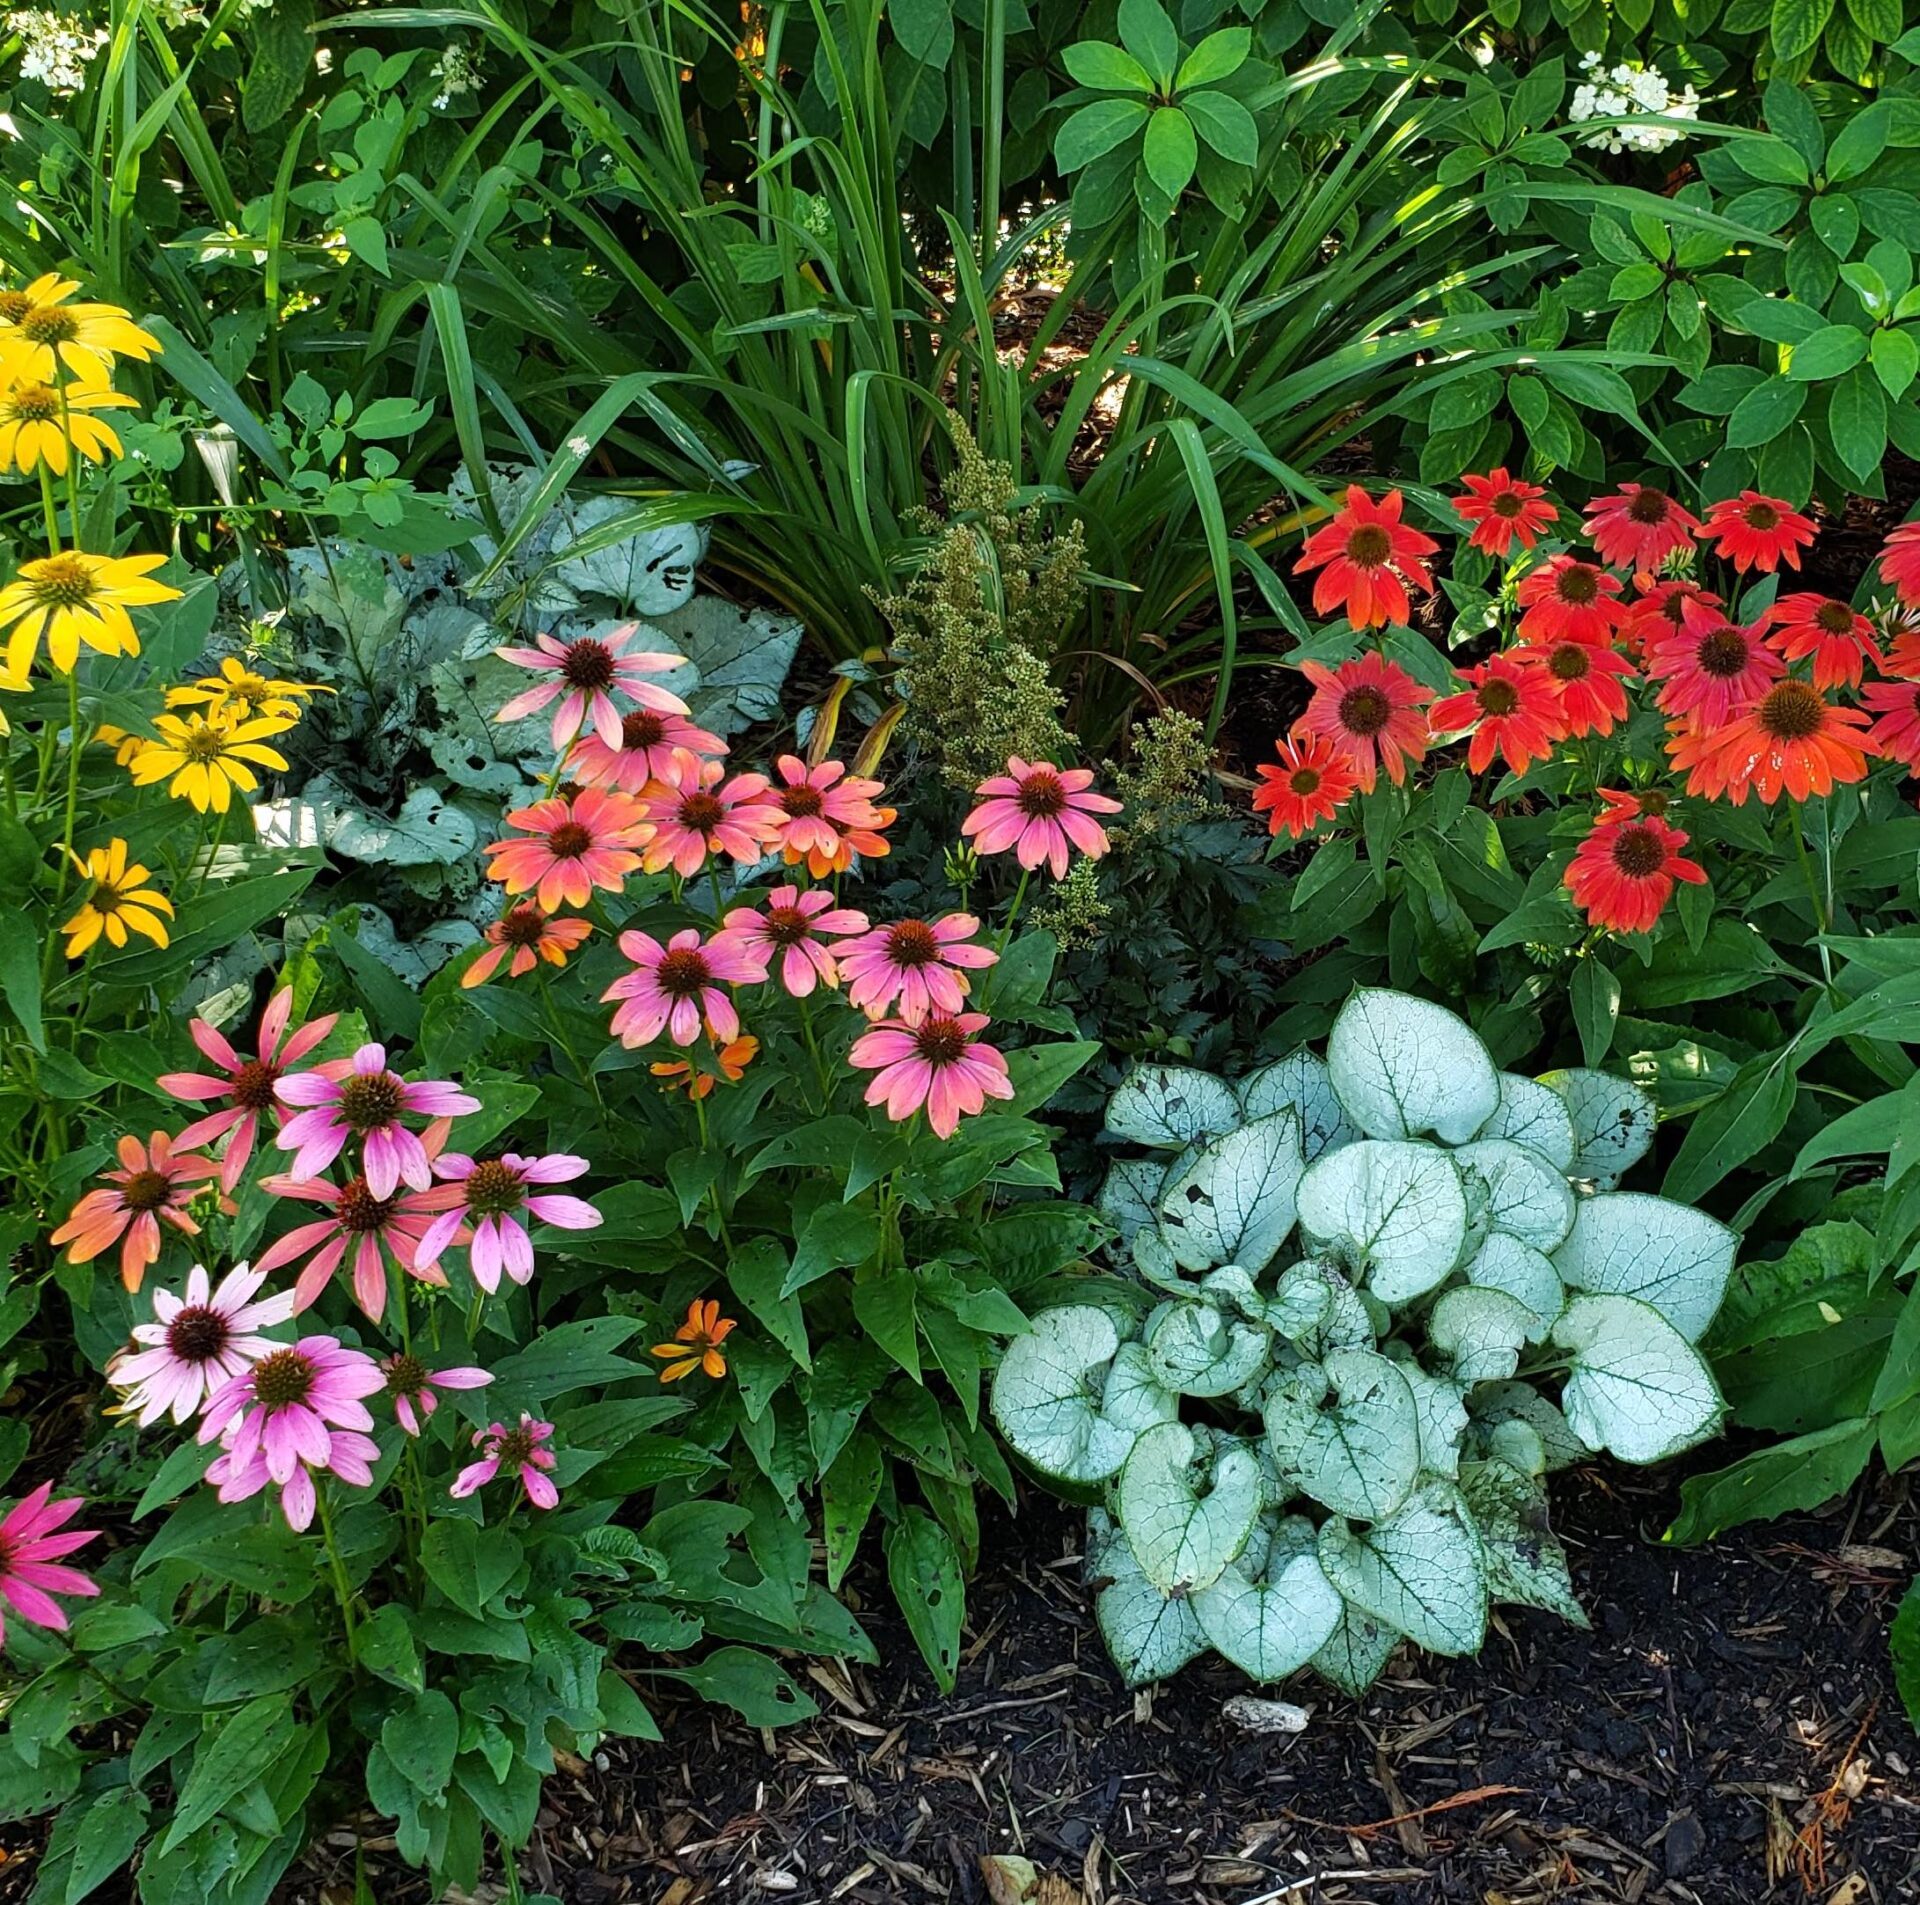 The image showcases a vibrant garden with a mix of yellow, pink, red, and orange flowers among green foliage and a white-leafed plant.